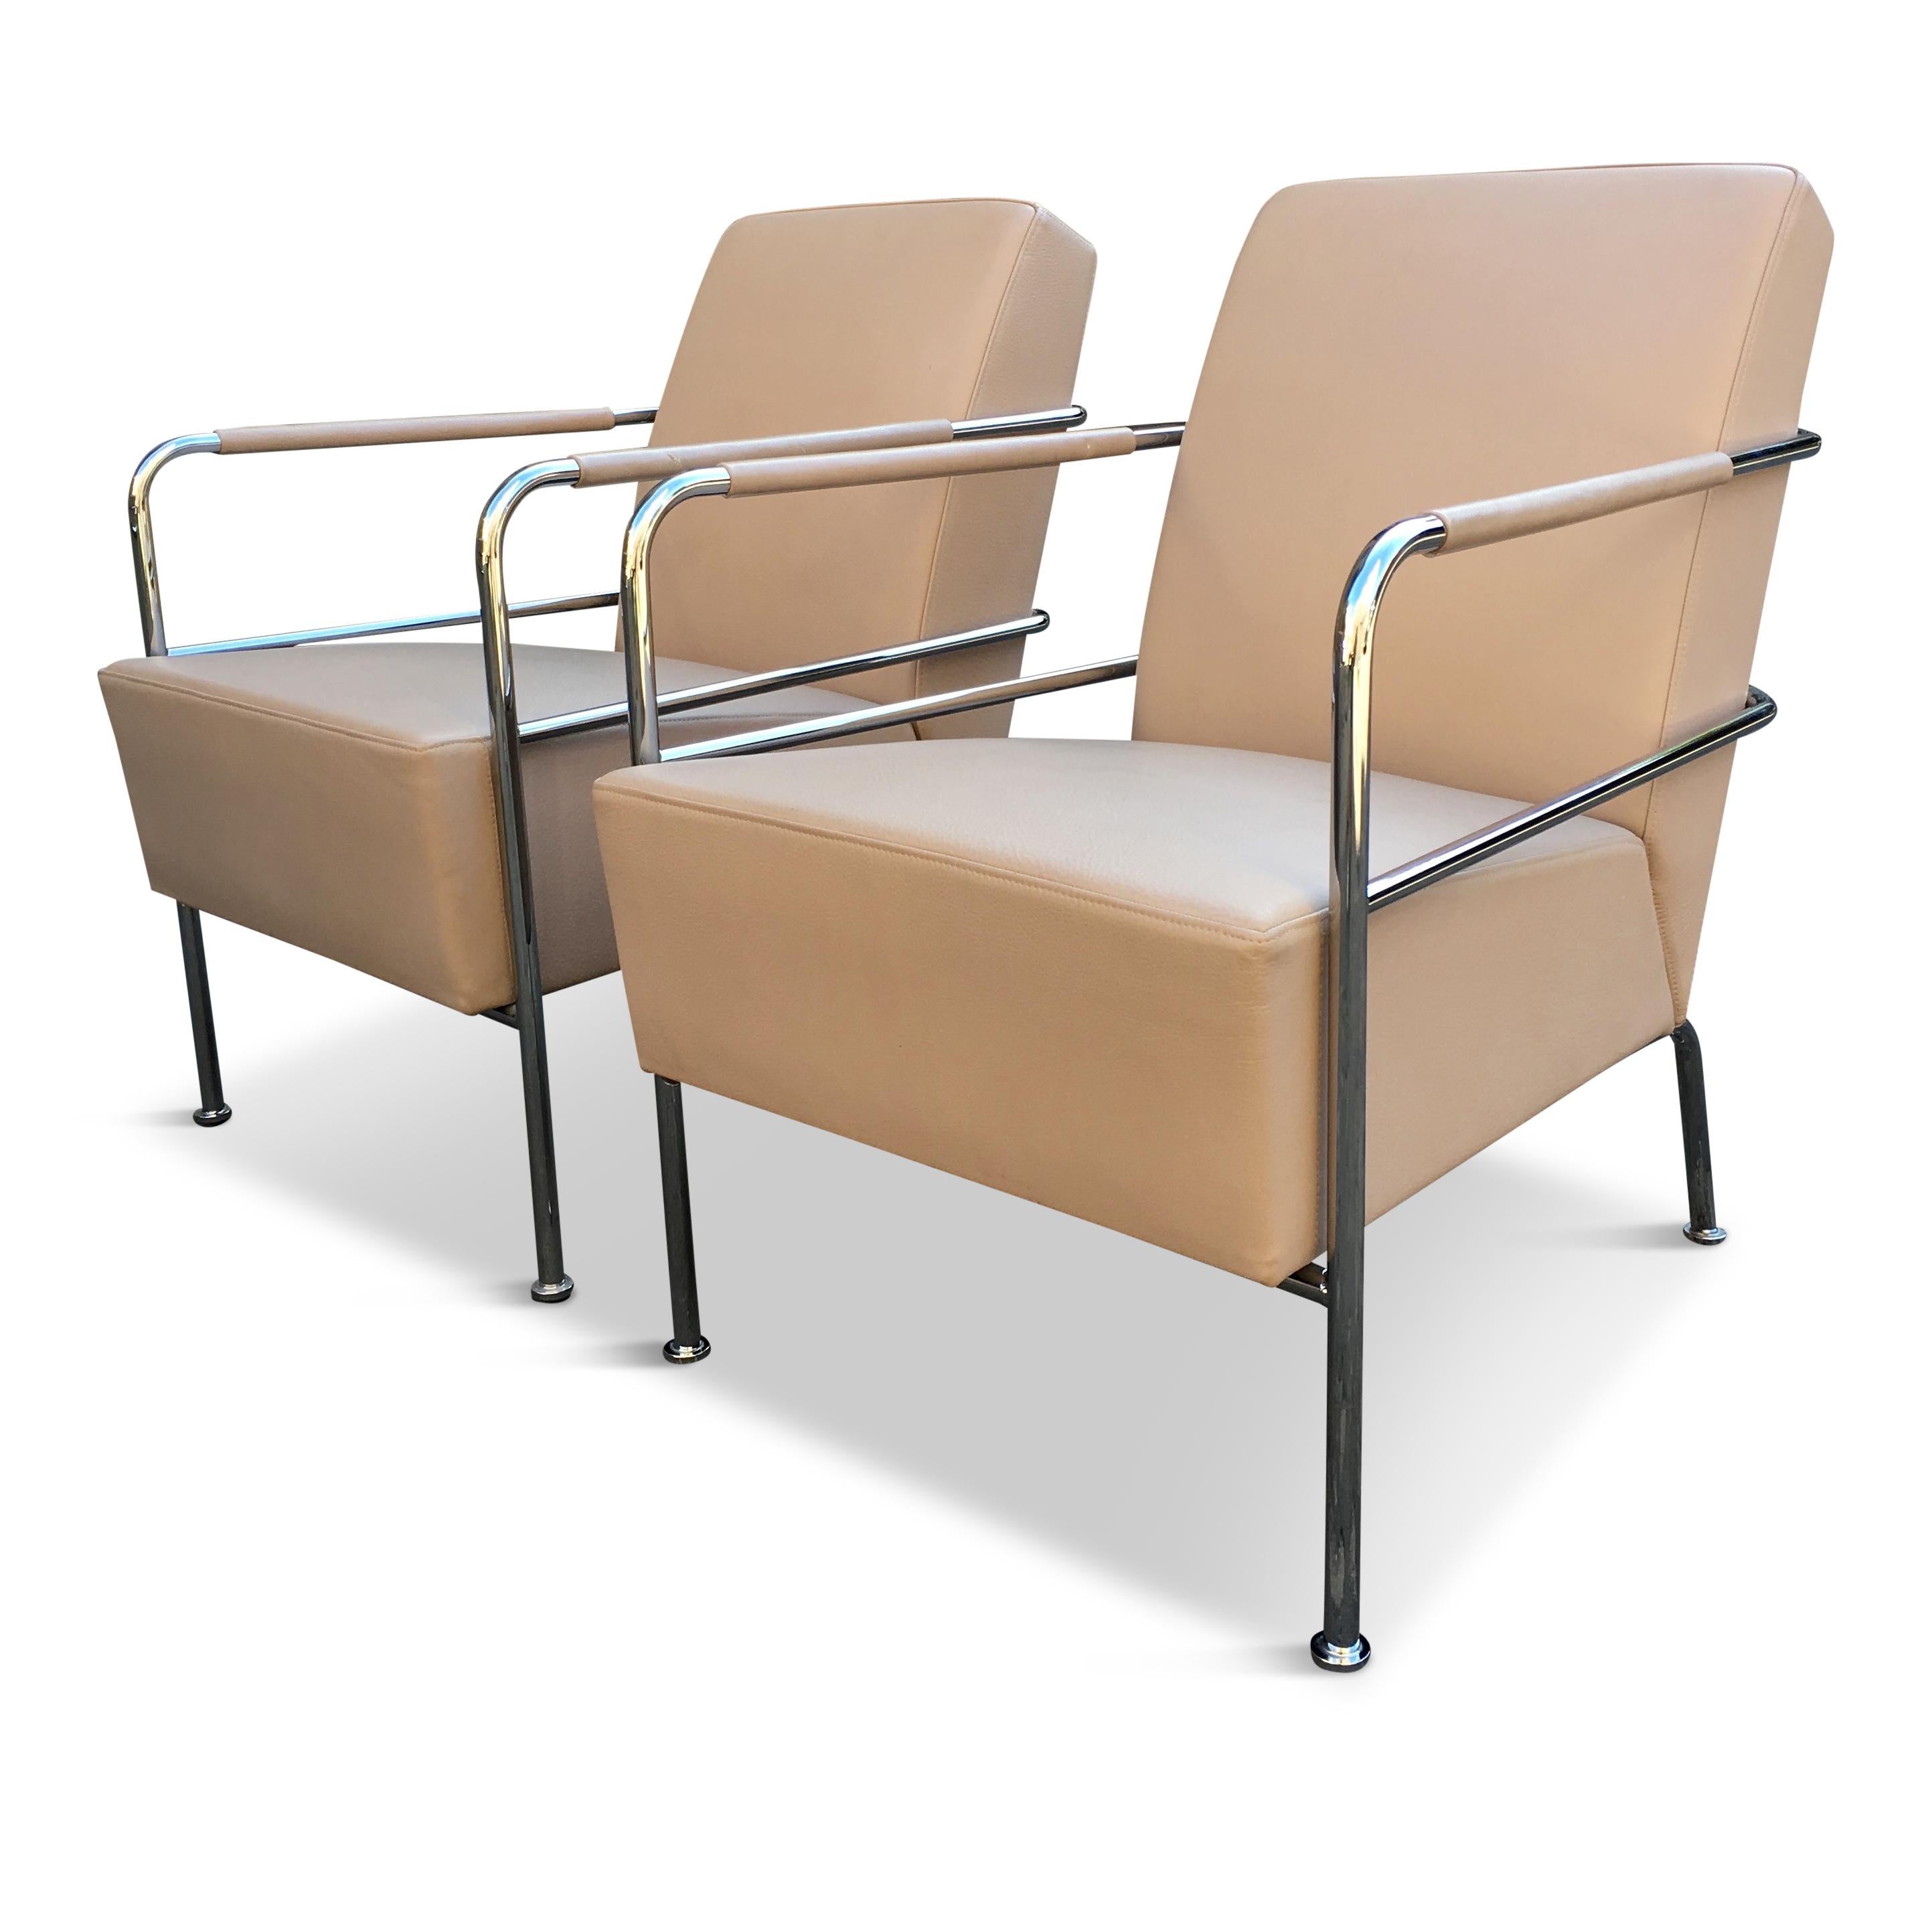 Gunilla Allard designed the Cinema series for the company Lammhults in 1994. The old sports cars have inspired her for the collection’s details – chrome, stitches and high-quality genuine leather.

This set consists of two-seat sofa and two easy